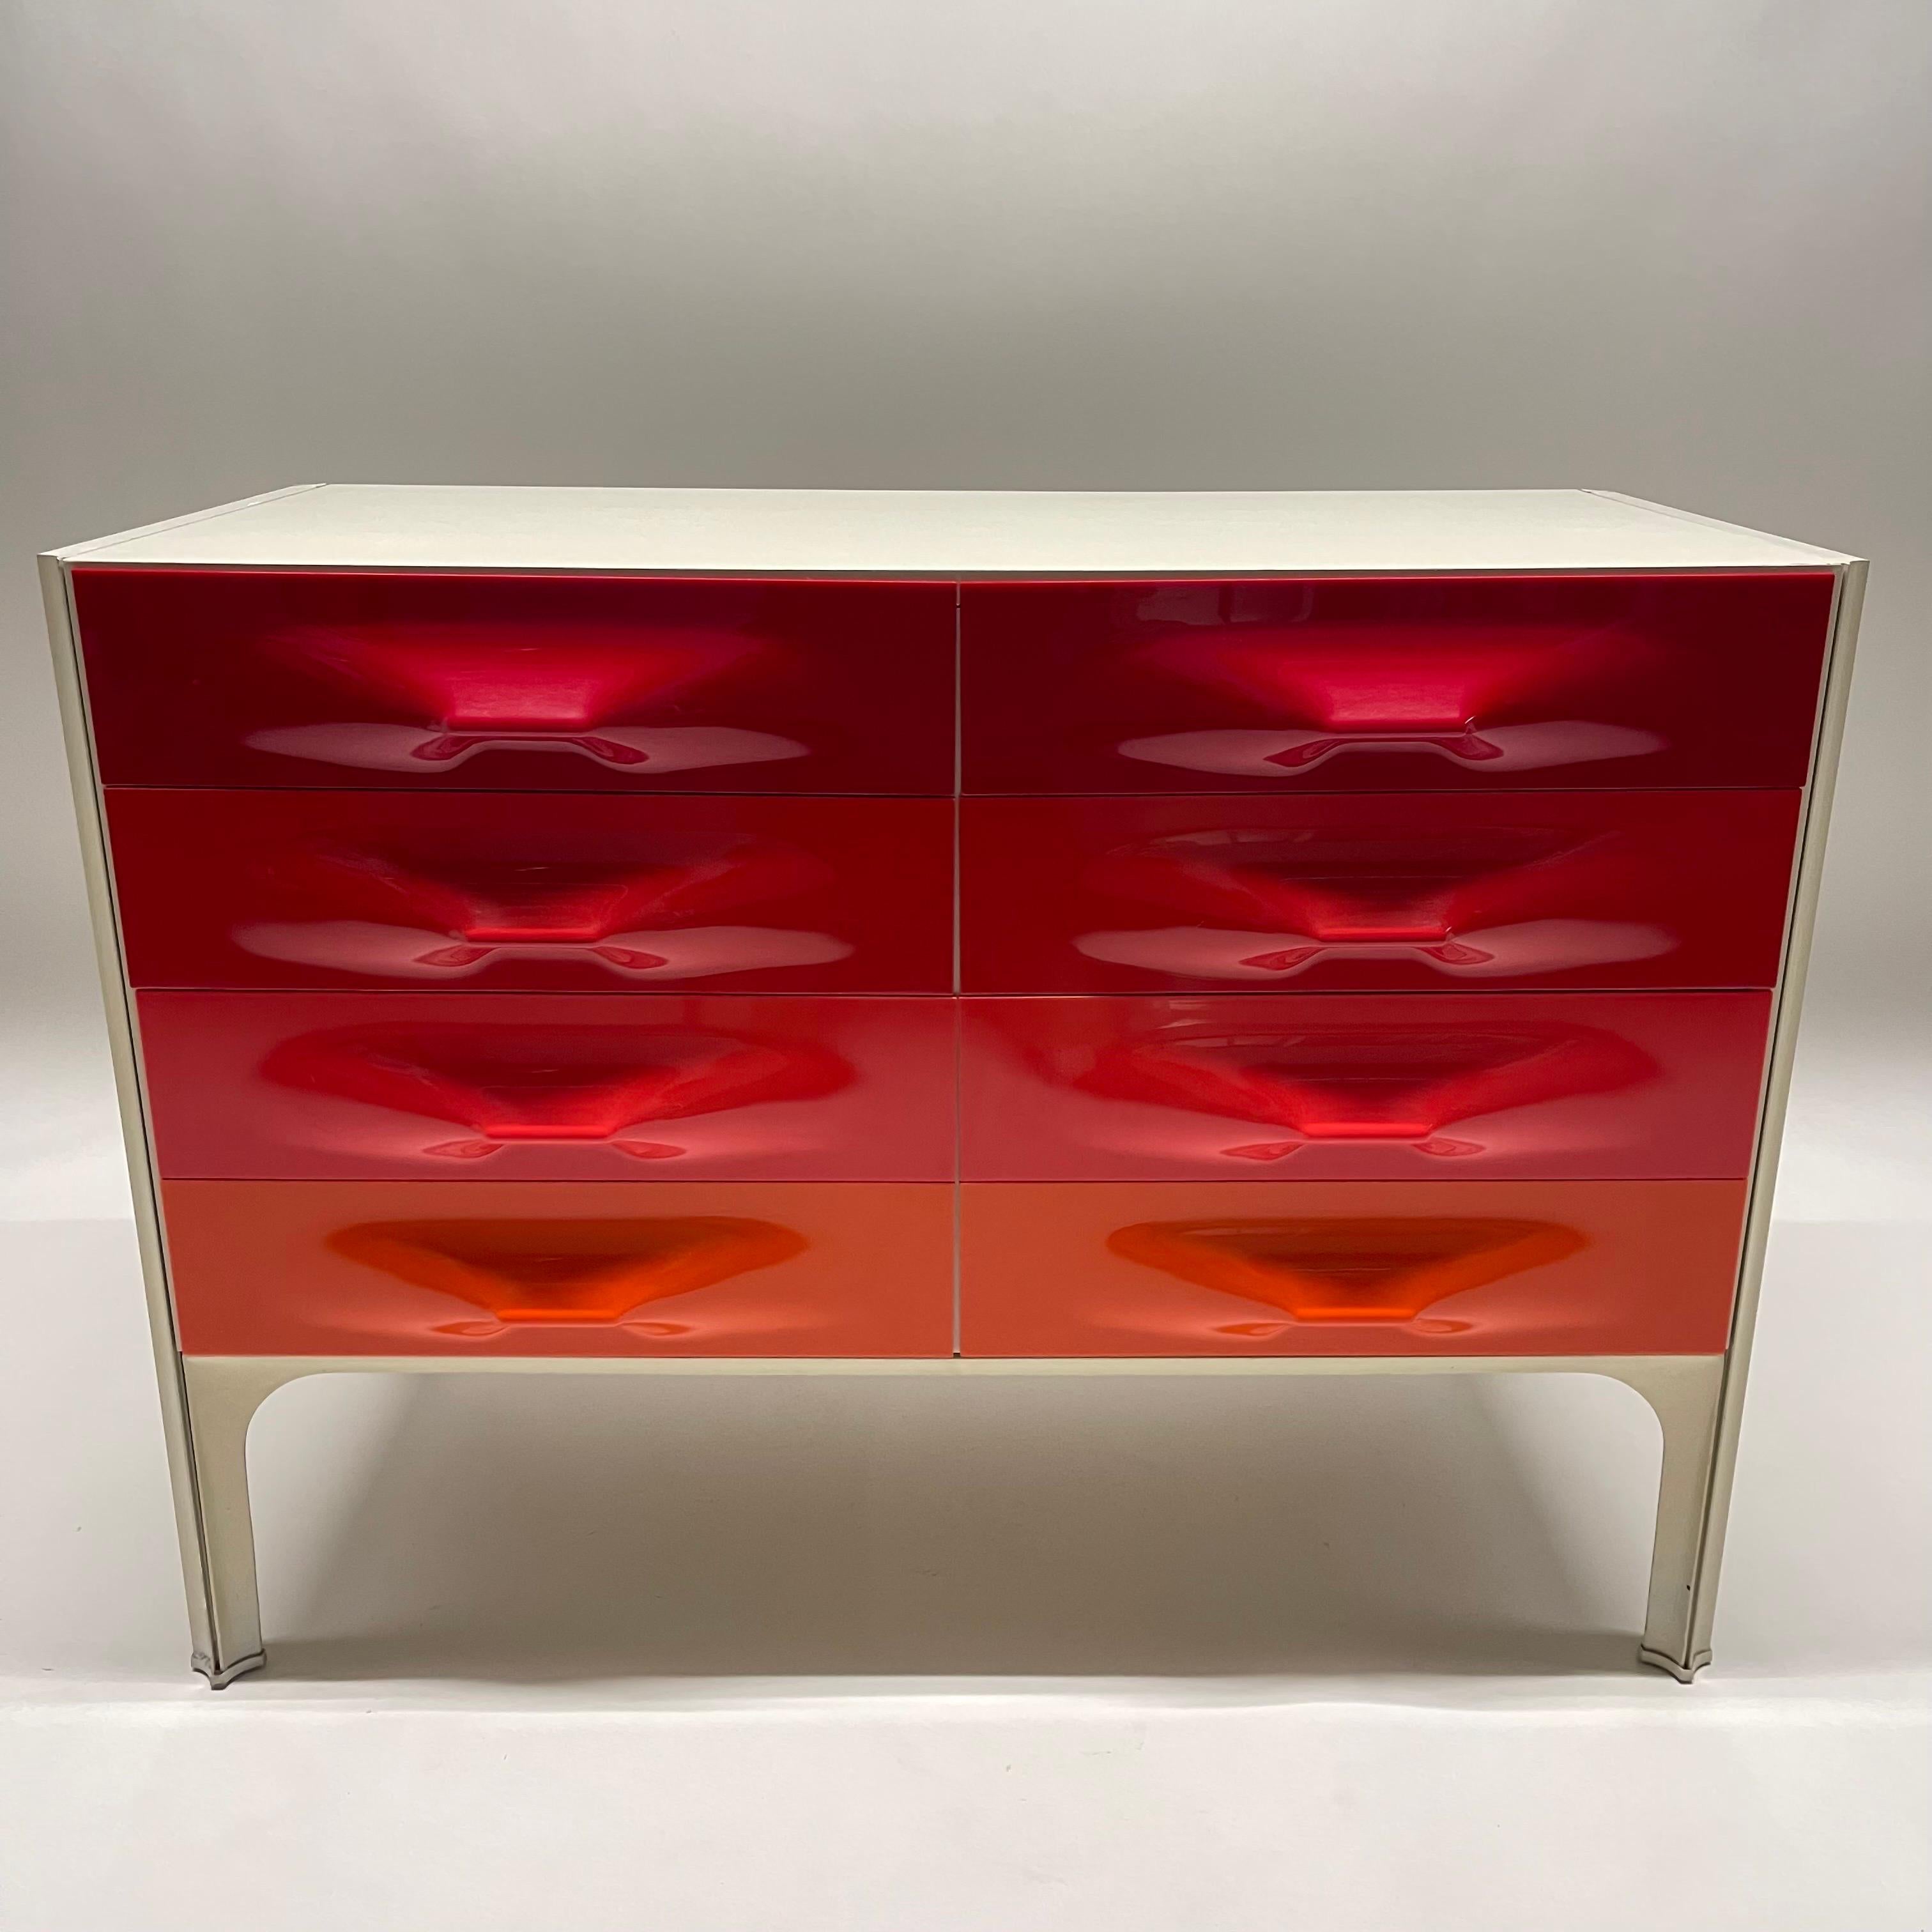 Rare Red to Orange Ombre DF-2000 6 drawer Commode, Chest of Drawers, or Dresser, rendered in Molded Plastic drawer fronts with Laminated wood case and Aluminum frame and legs. Designed by Raymond Loewy from his X-Line Series for Doubinsky Freres,